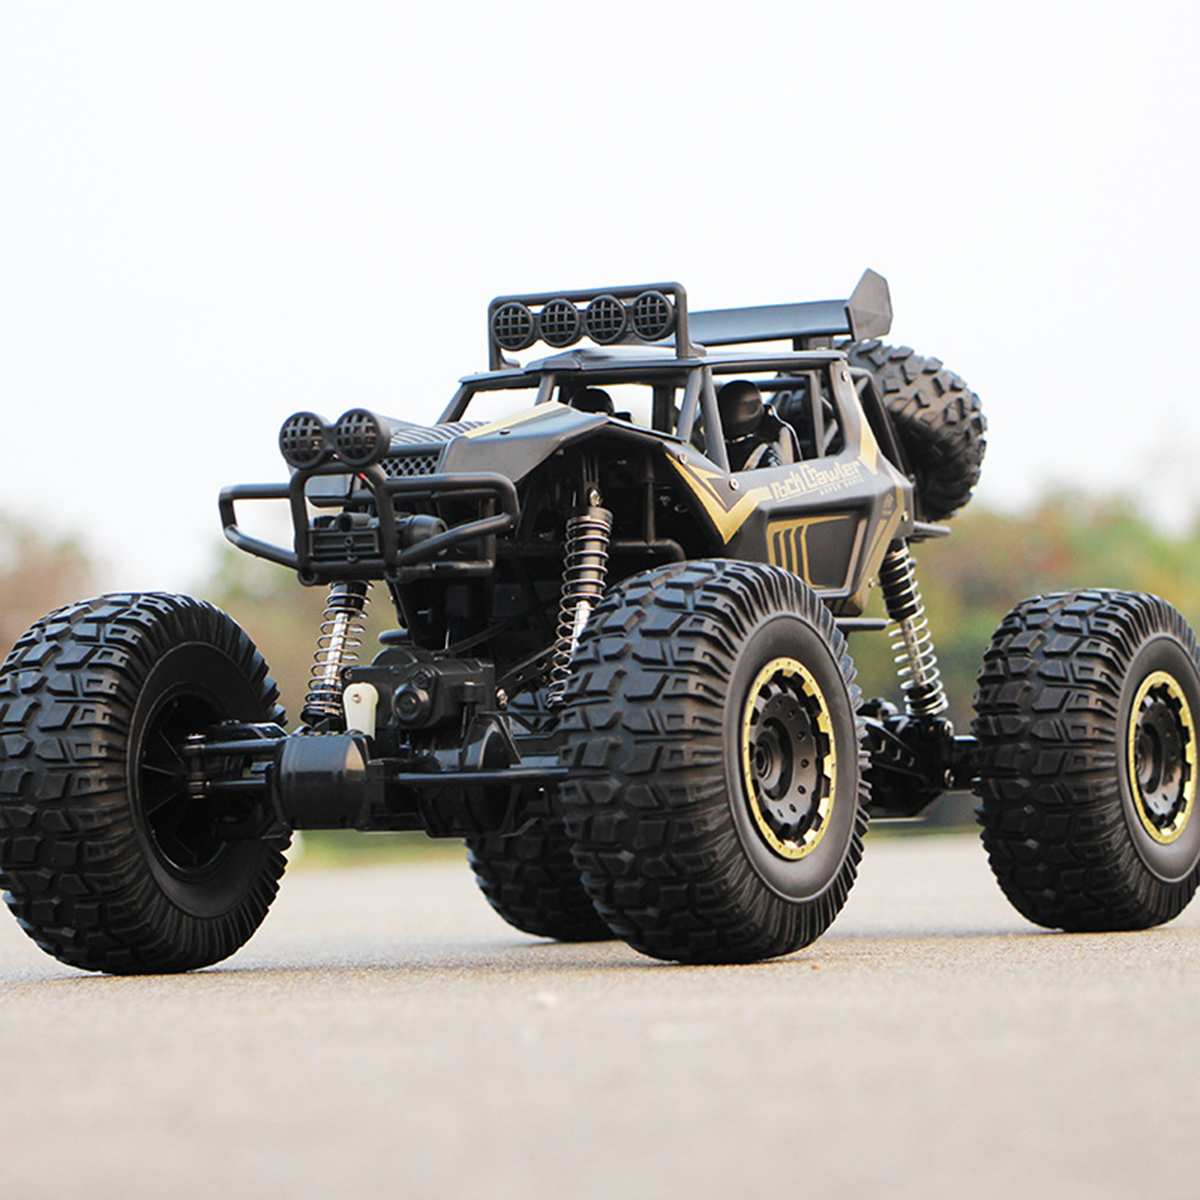 1:8 50cm RC Car 2.4G Radio Control 4WD Off-road Electric Vehicle Monster Buggy Remote Control Car Gift Toys For Children Boys